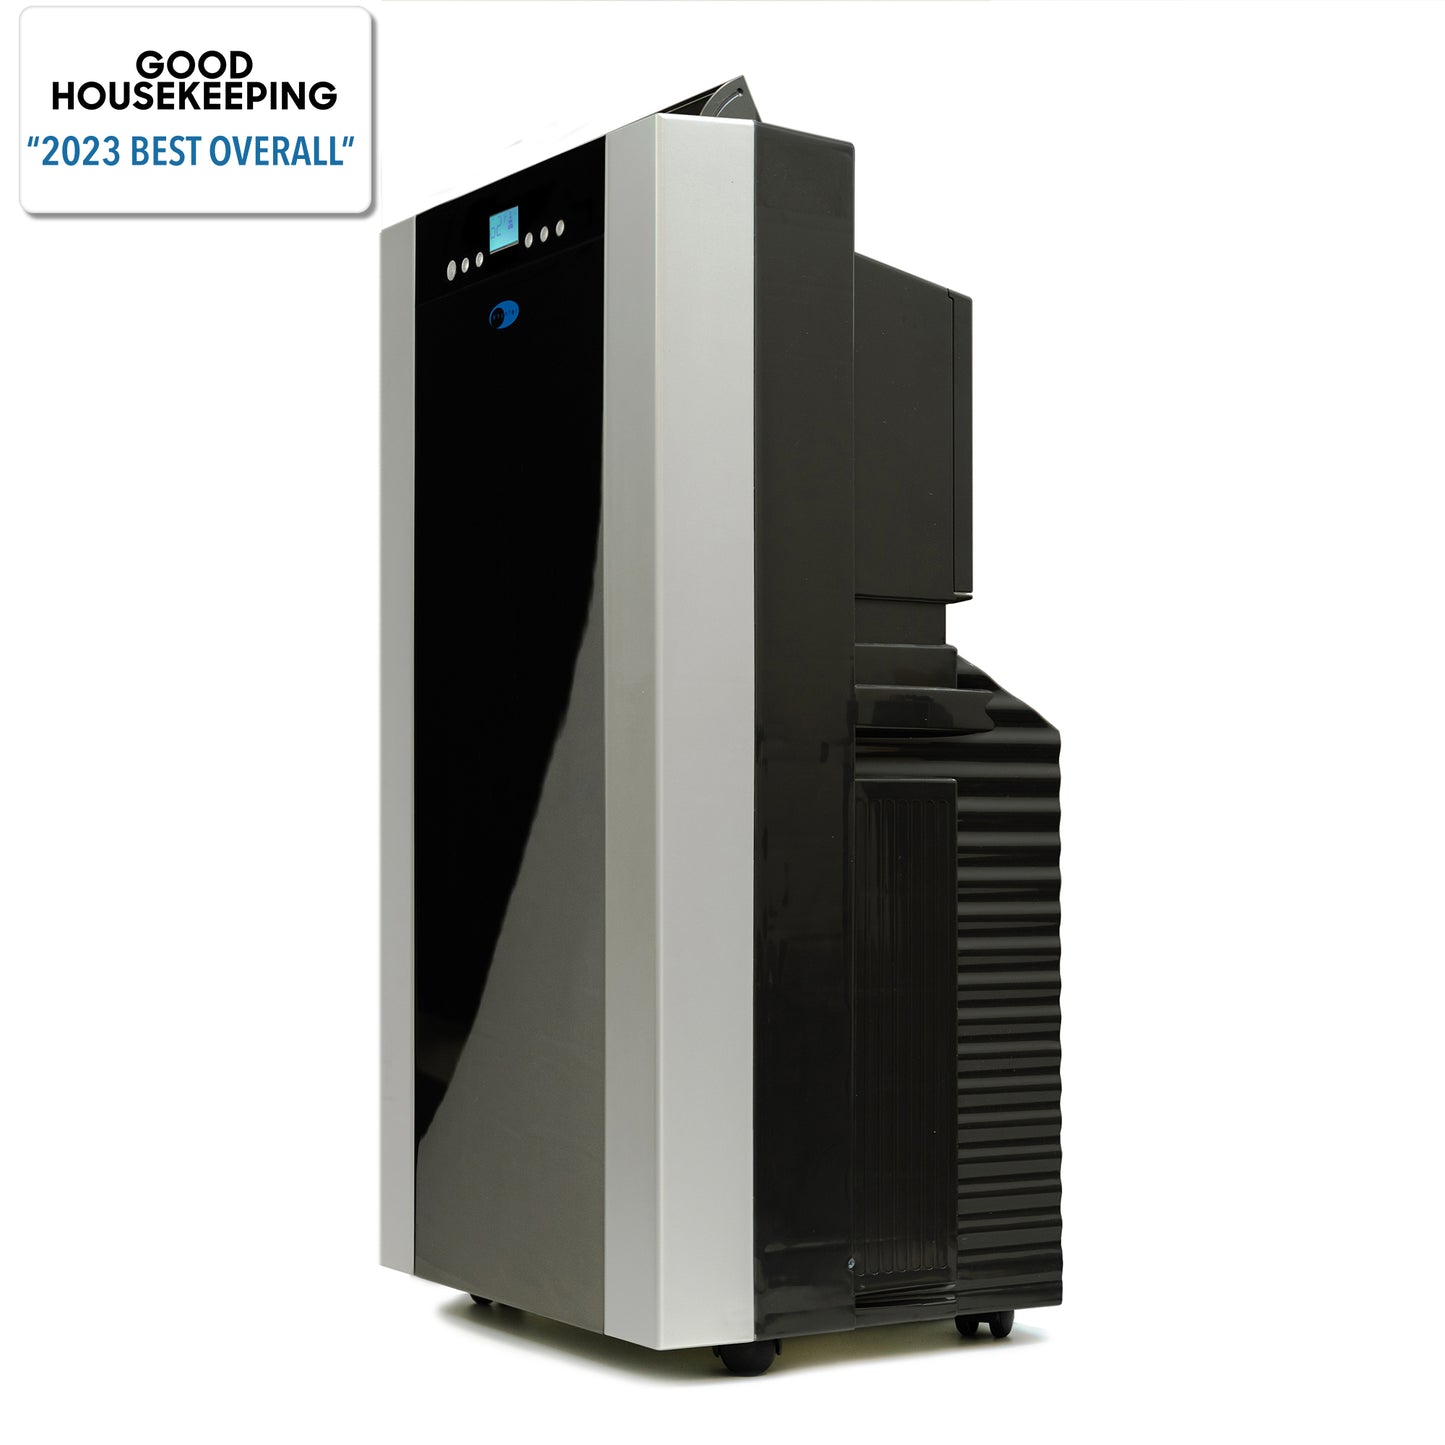 Buy a Whynter 14,000 BTU 500 sq ft Dual Hose Portable Air Conditioner with Activated Carbon Filter by Chilled Beverages